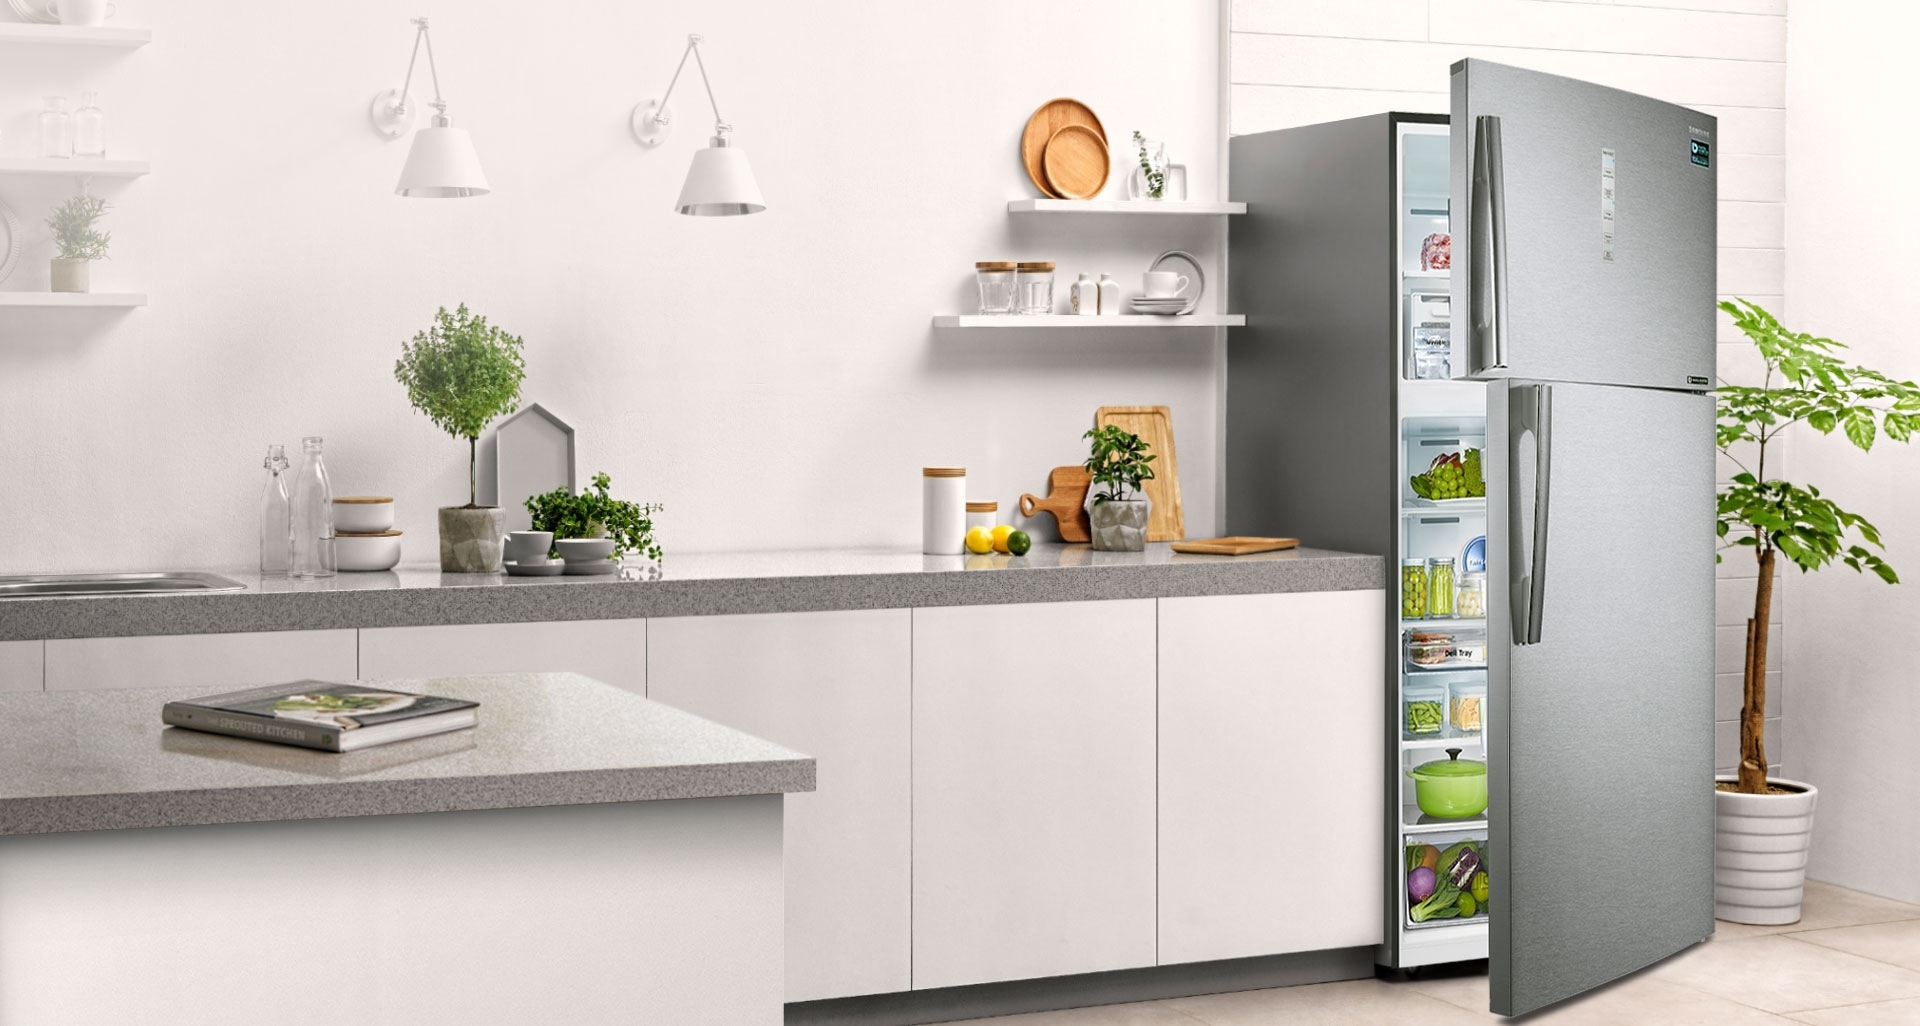 SAMSUNG Refrigerator 580L A+ - Stainless Steel